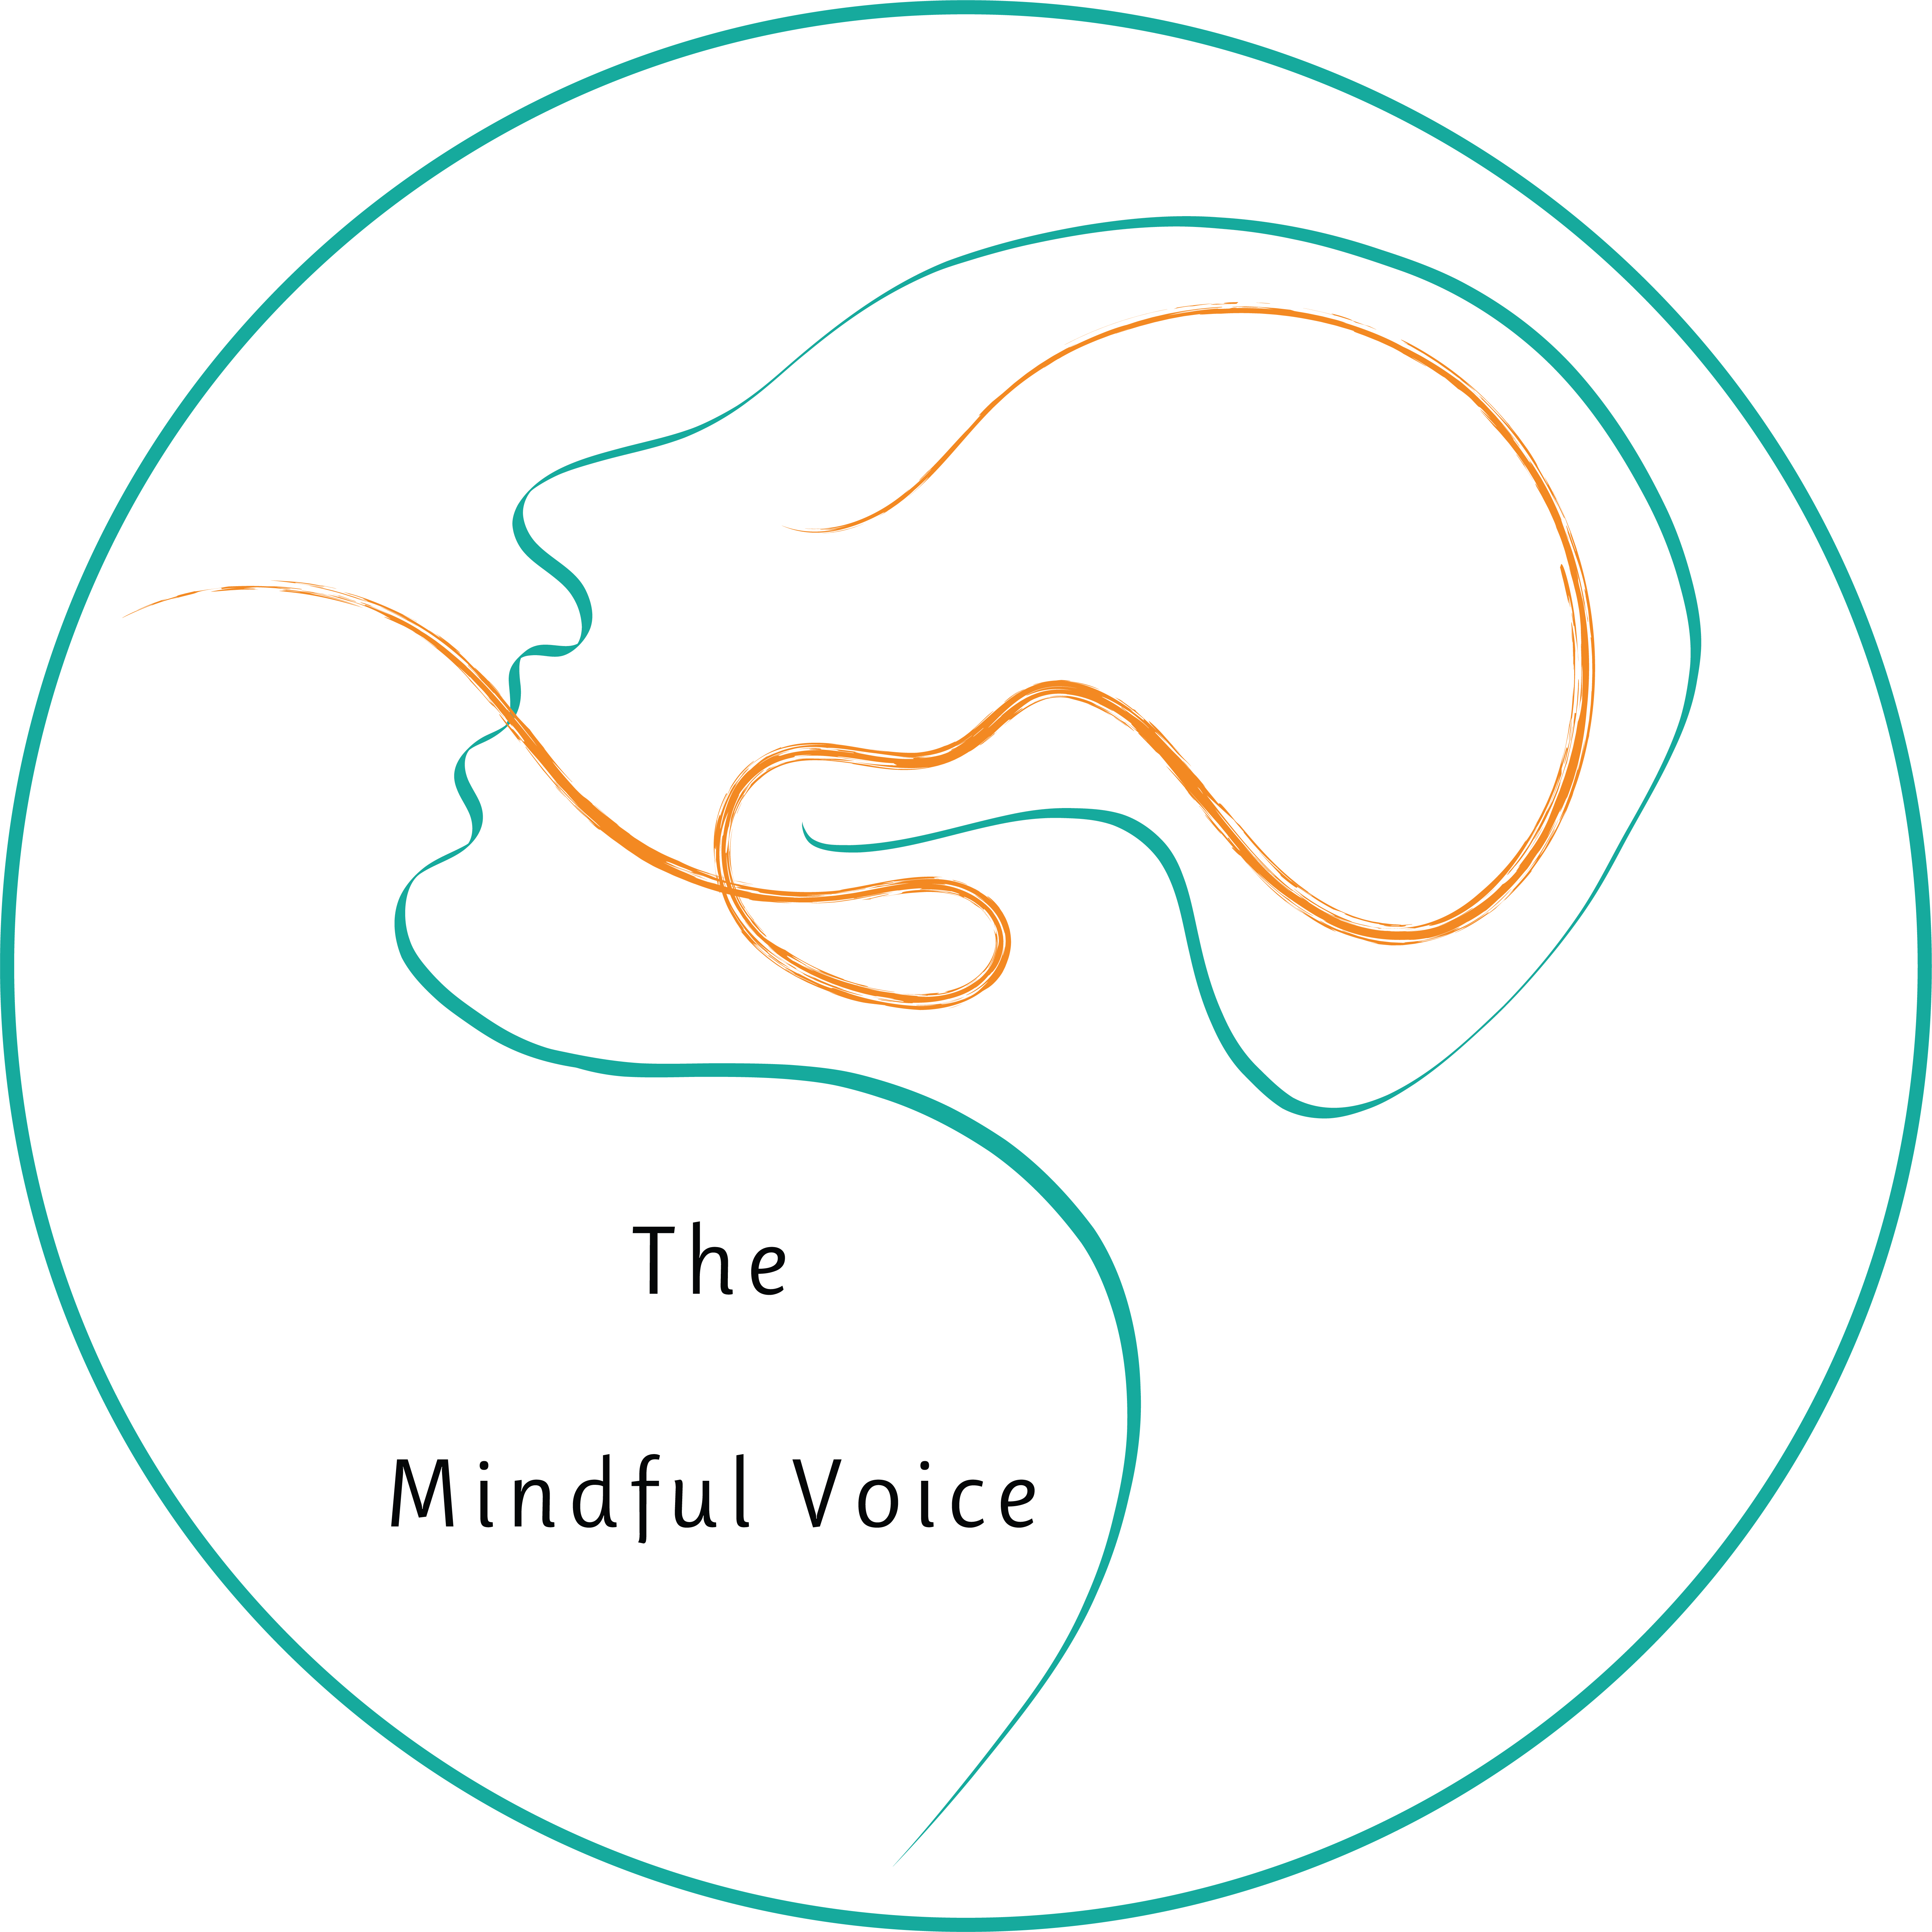 The Mindful Voice